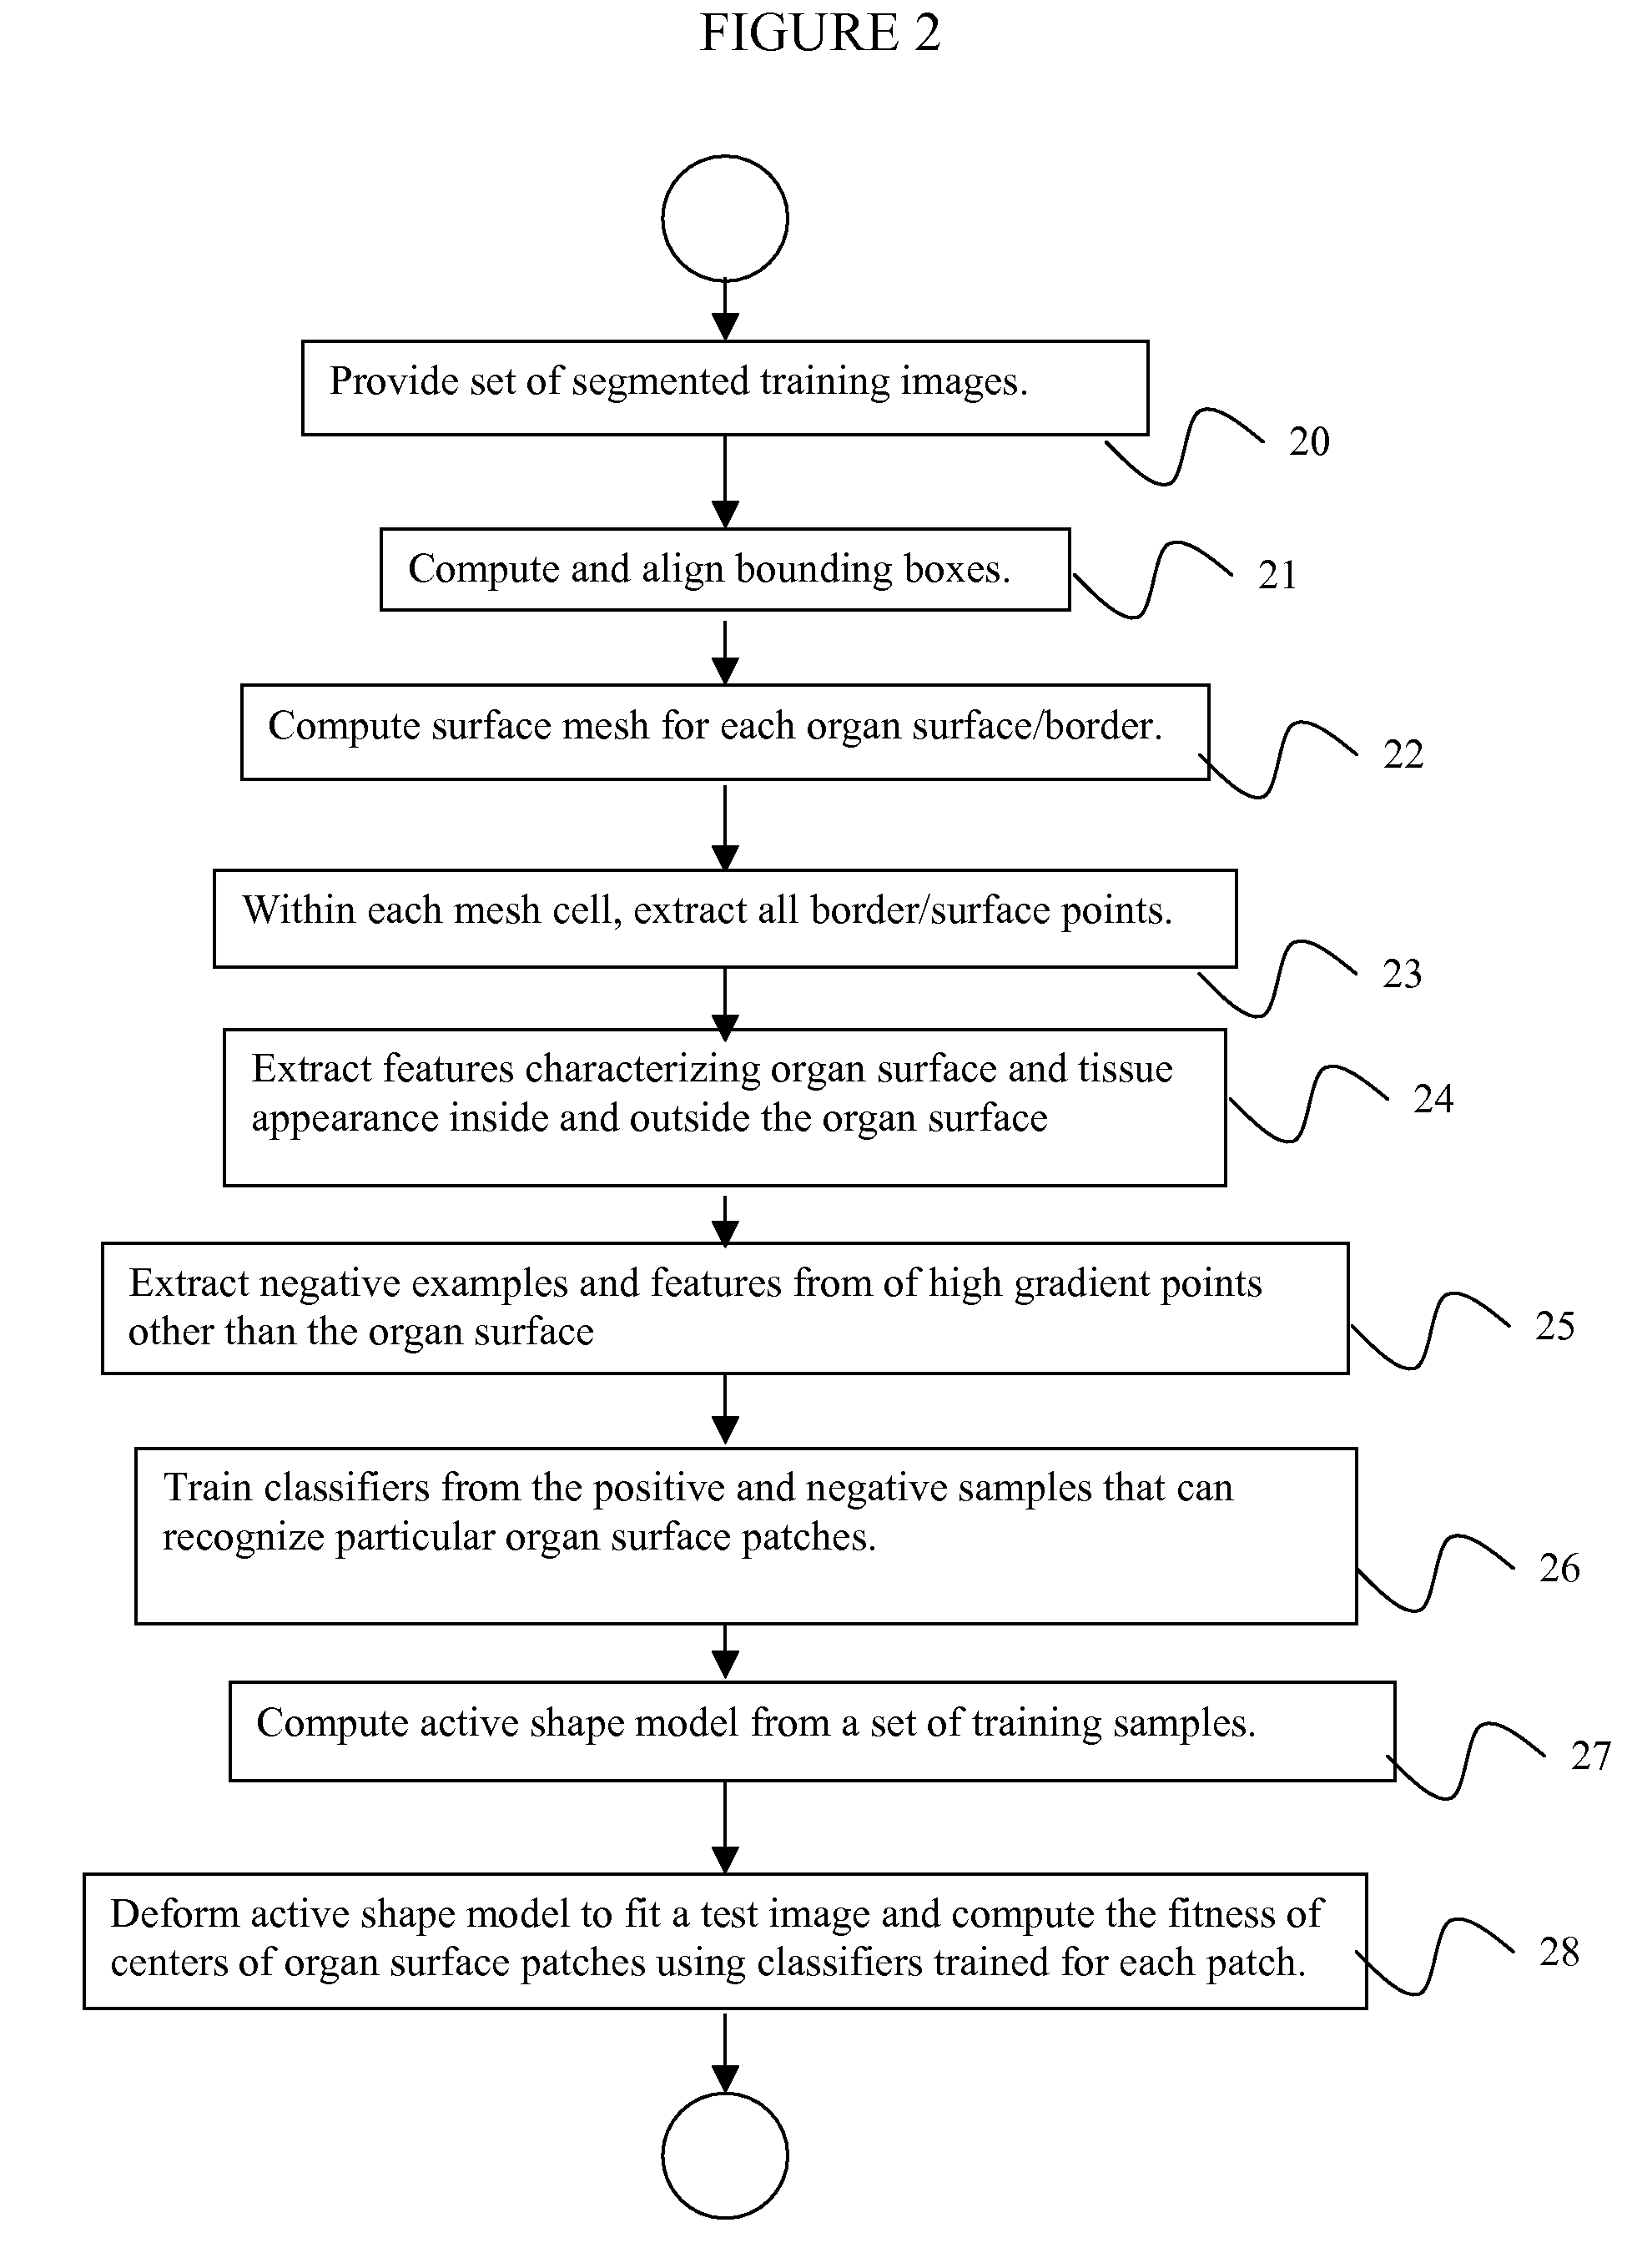 System and Method for Organ Segmentation Using Surface Patch Classification in 2D and 3D Images